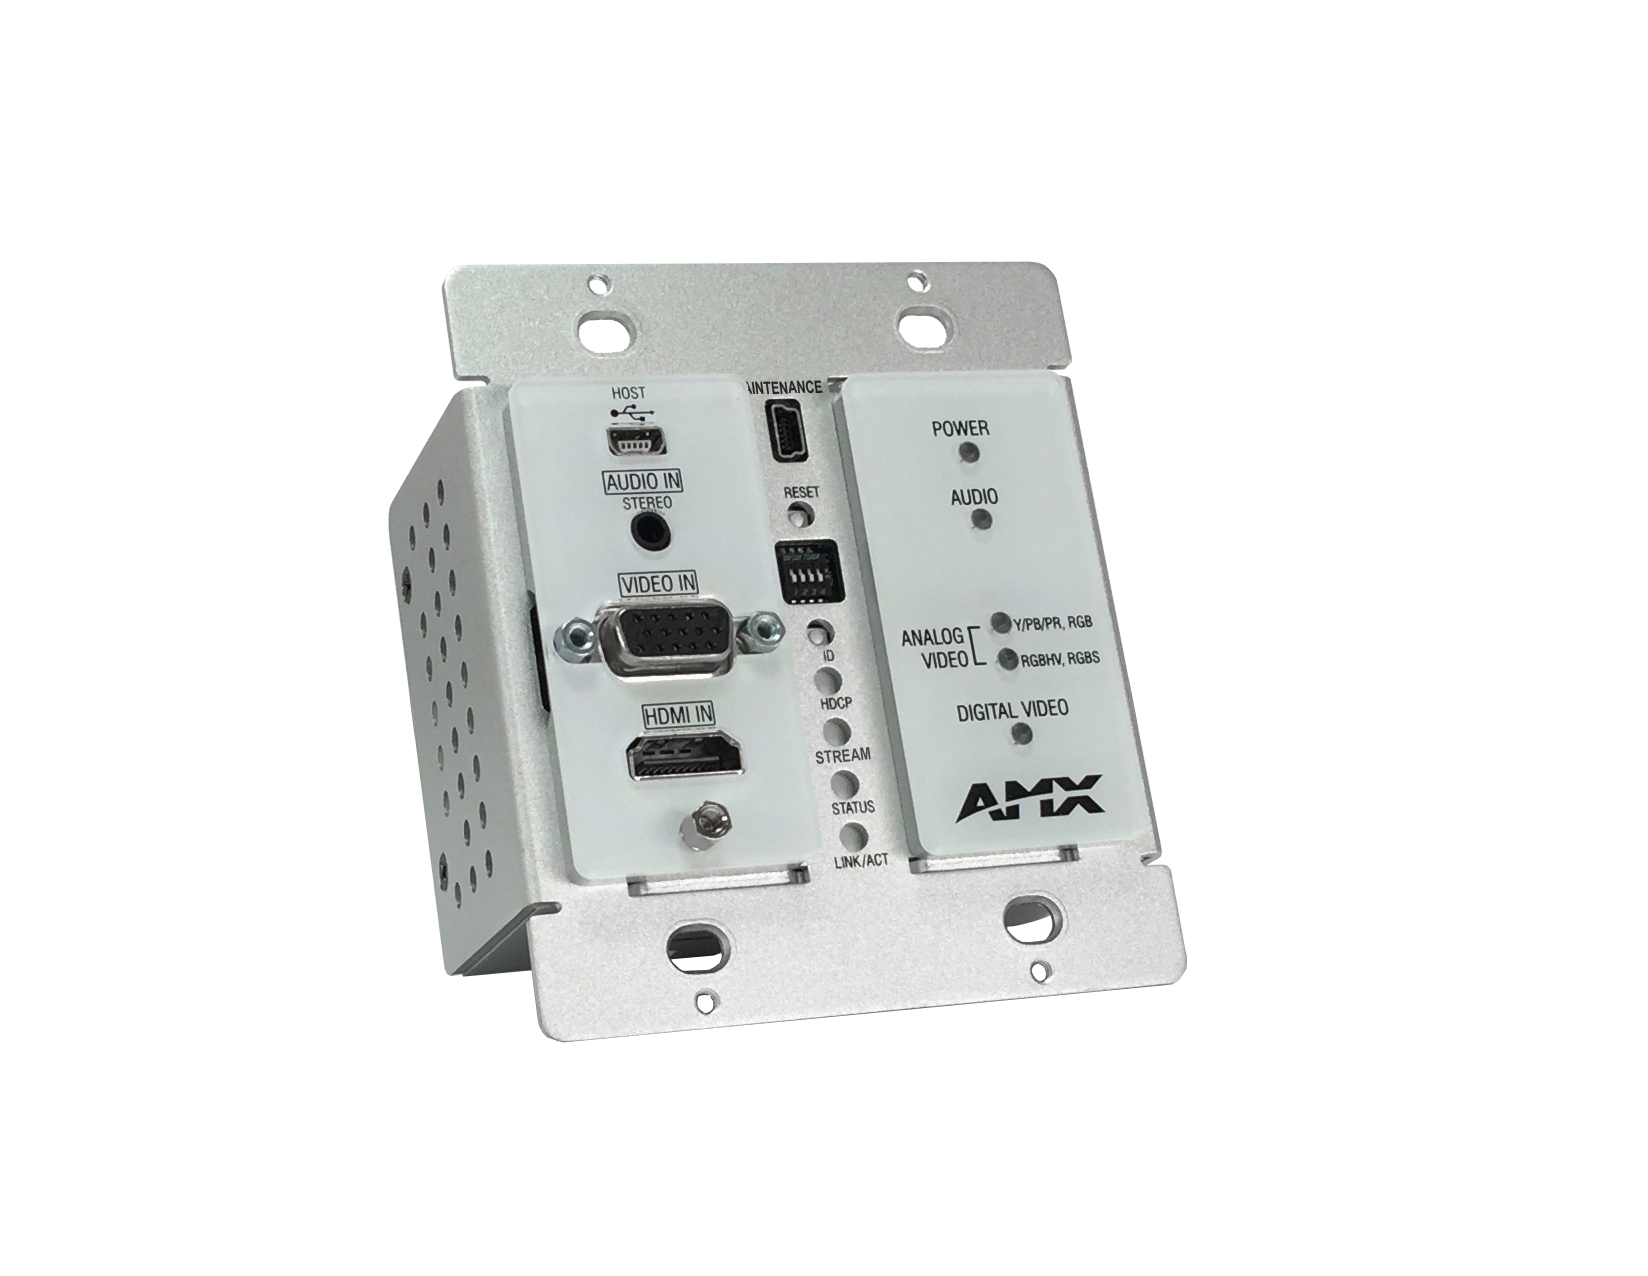 Harman Professional Solutions Expands Popular AMX N2300 Series with AMX N2315 Networked AV Wallplate Encoder